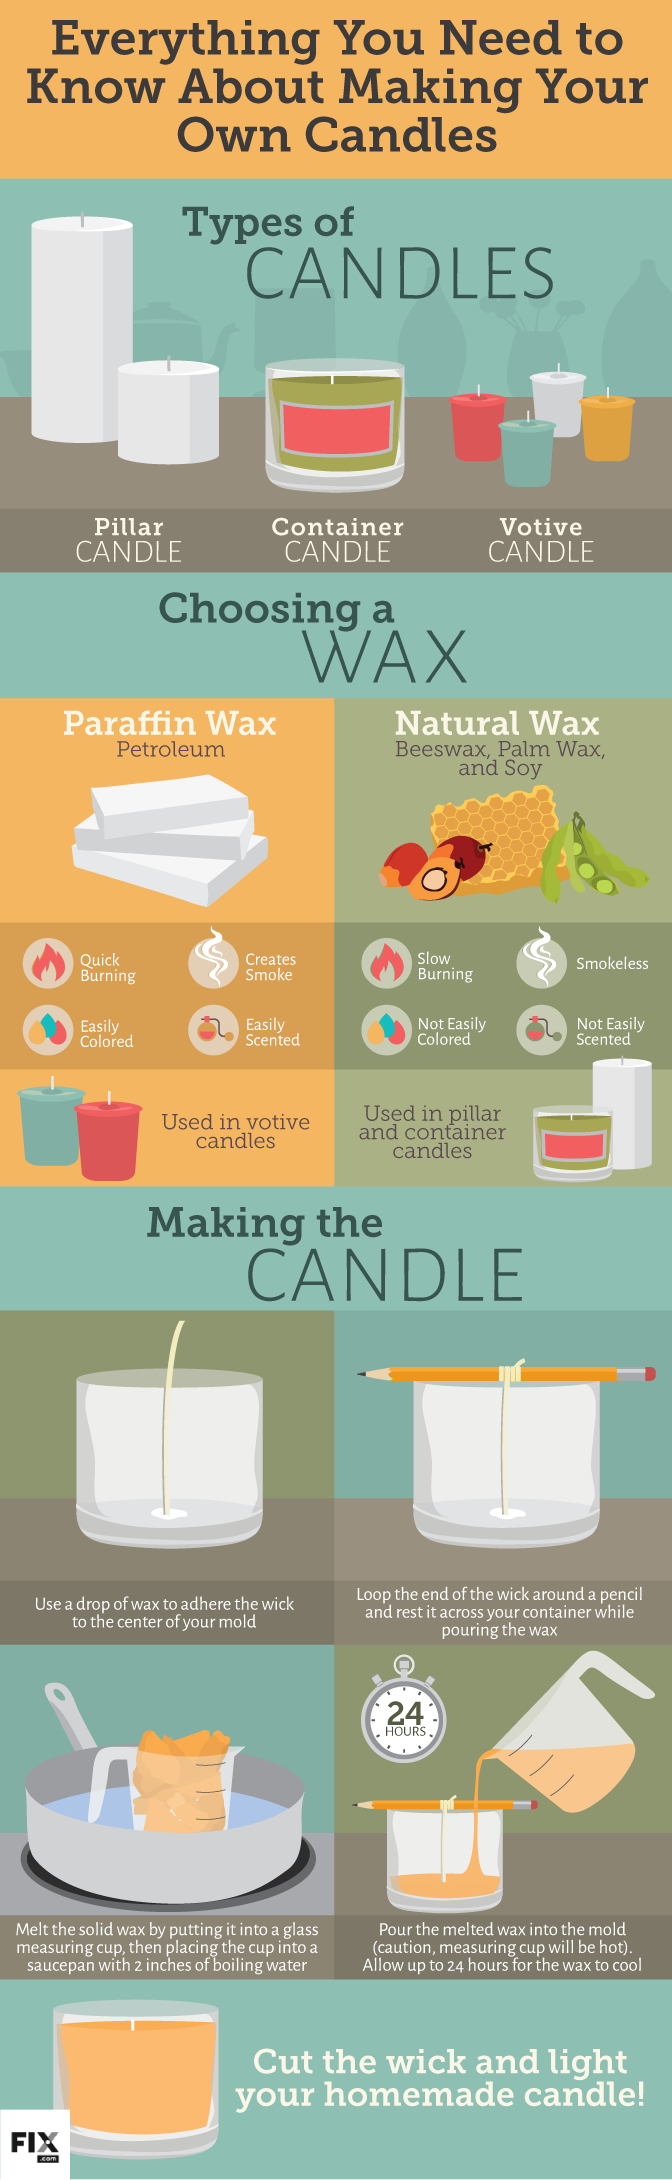 Making Your Own Candles